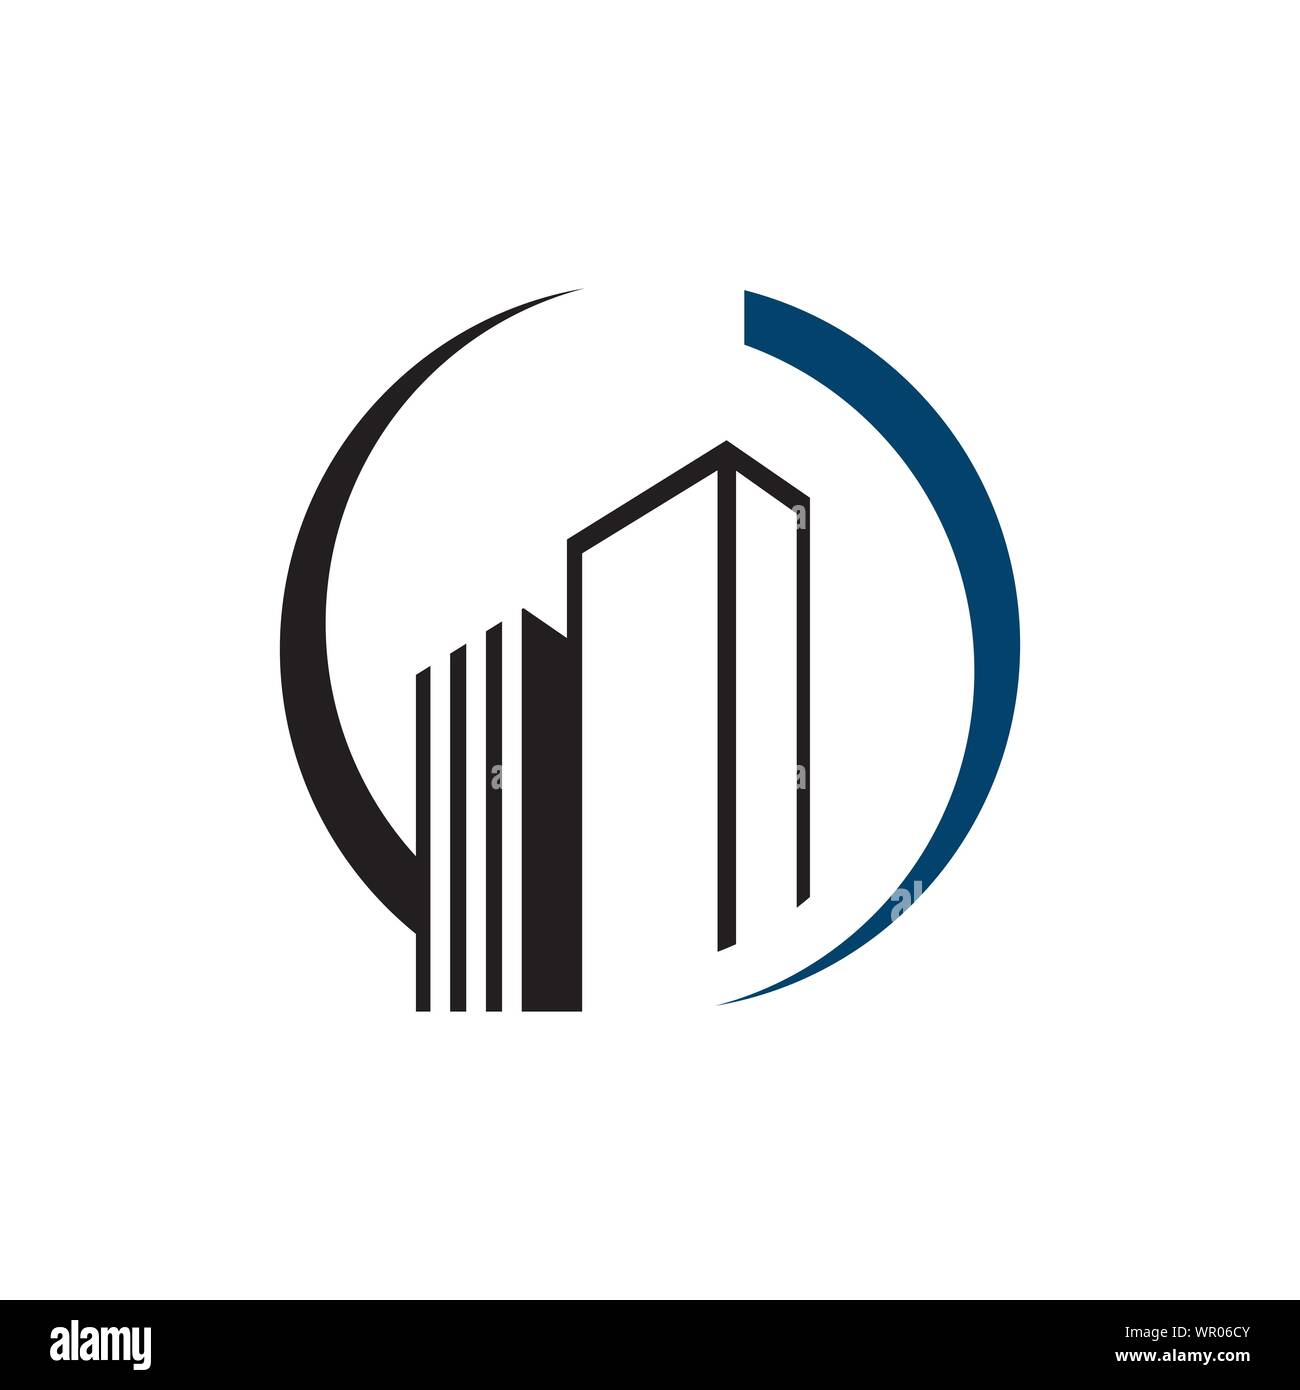 Cityscape design corporation of buildings Logo for Real estate business company Stock Vector